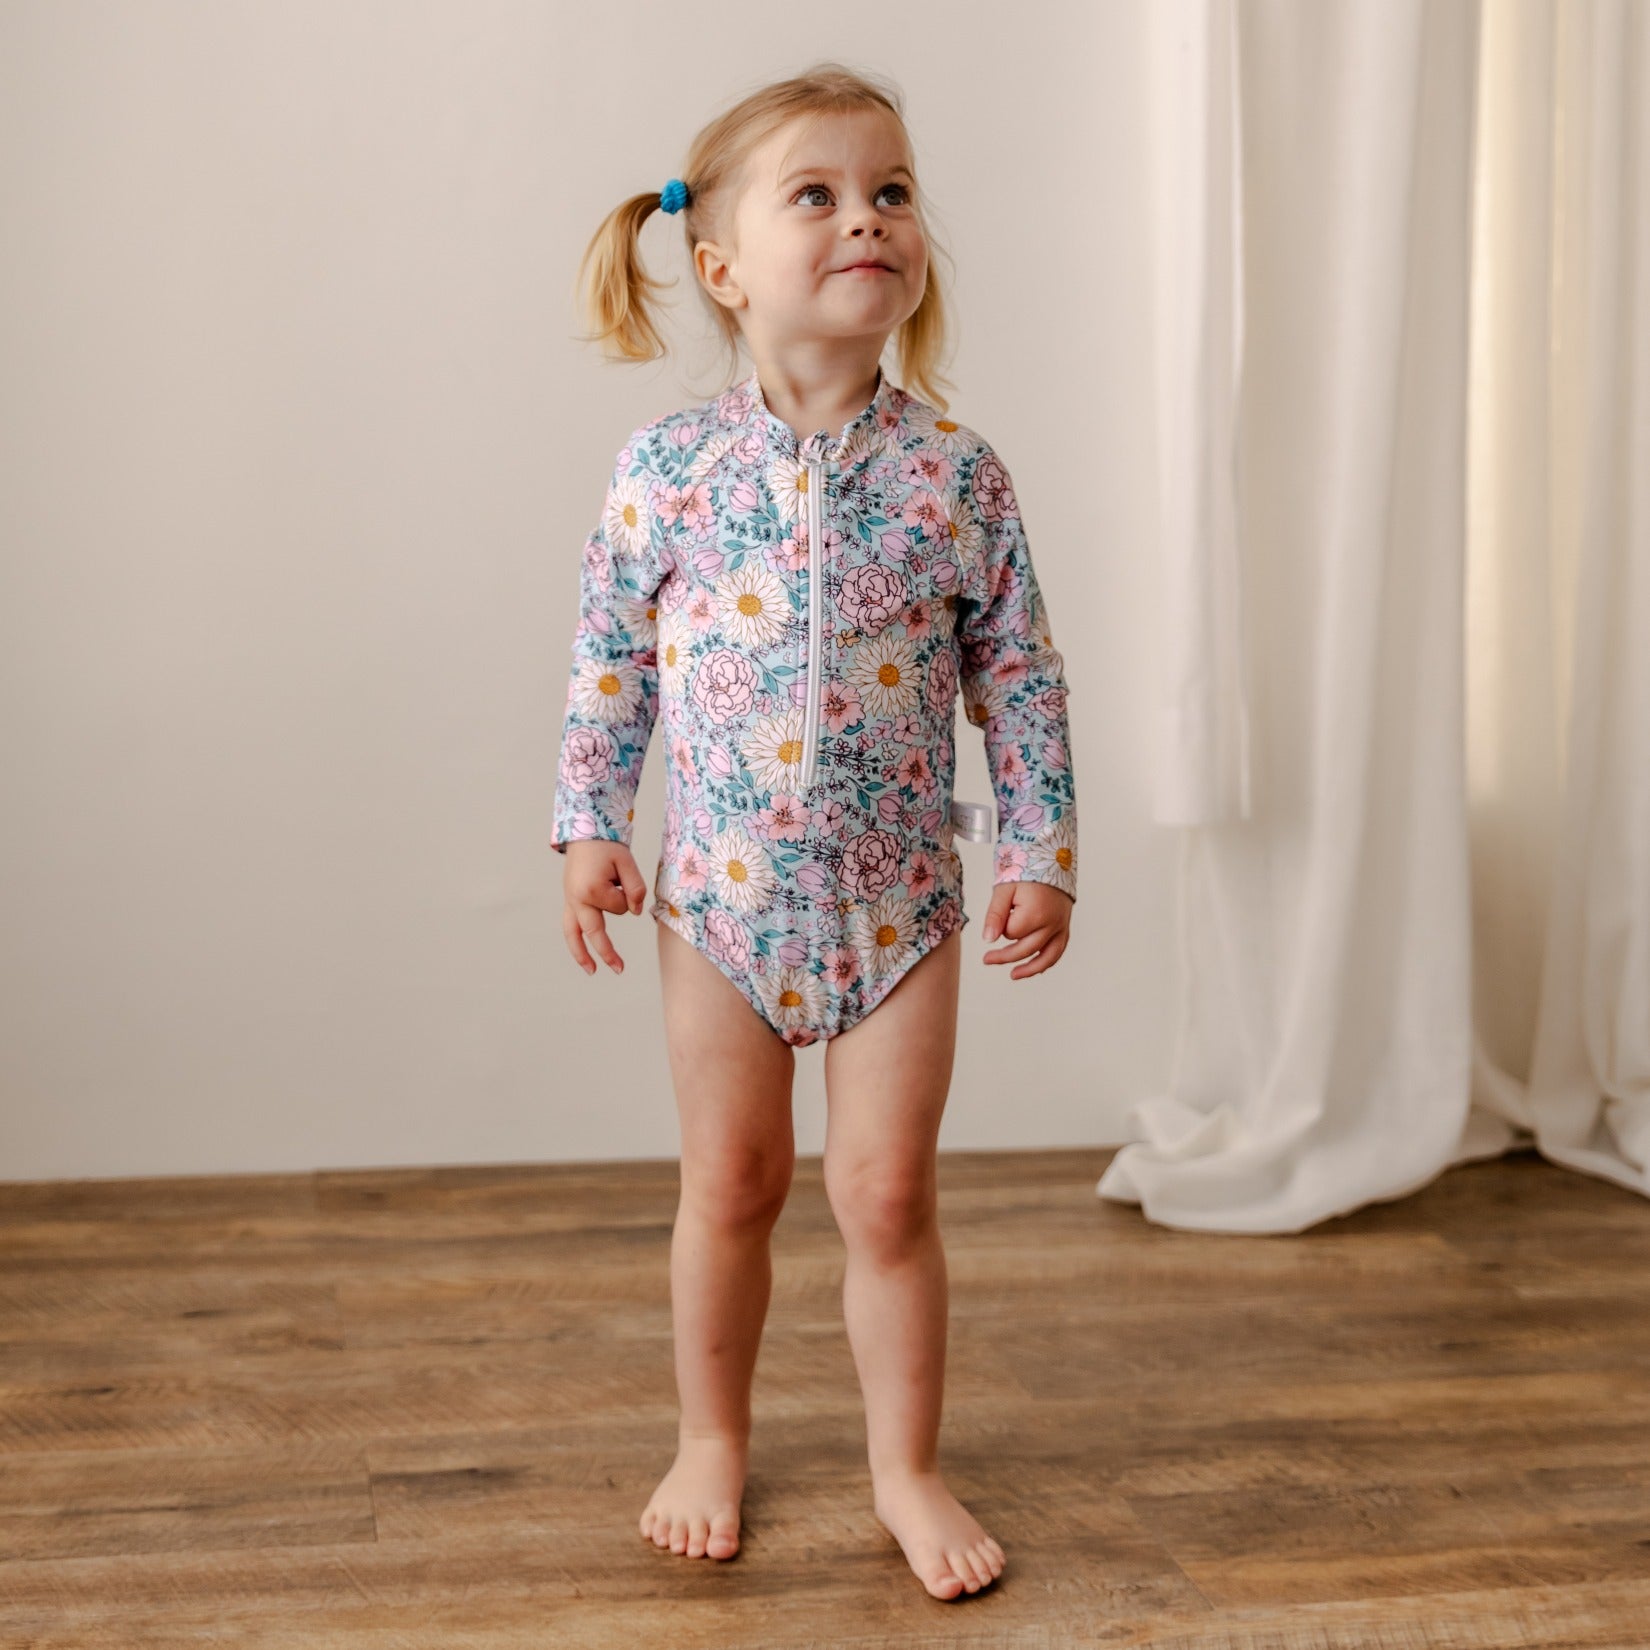 Bear & Moo Swimsuits | Harper in Boho Floral | available at Bear & Moo